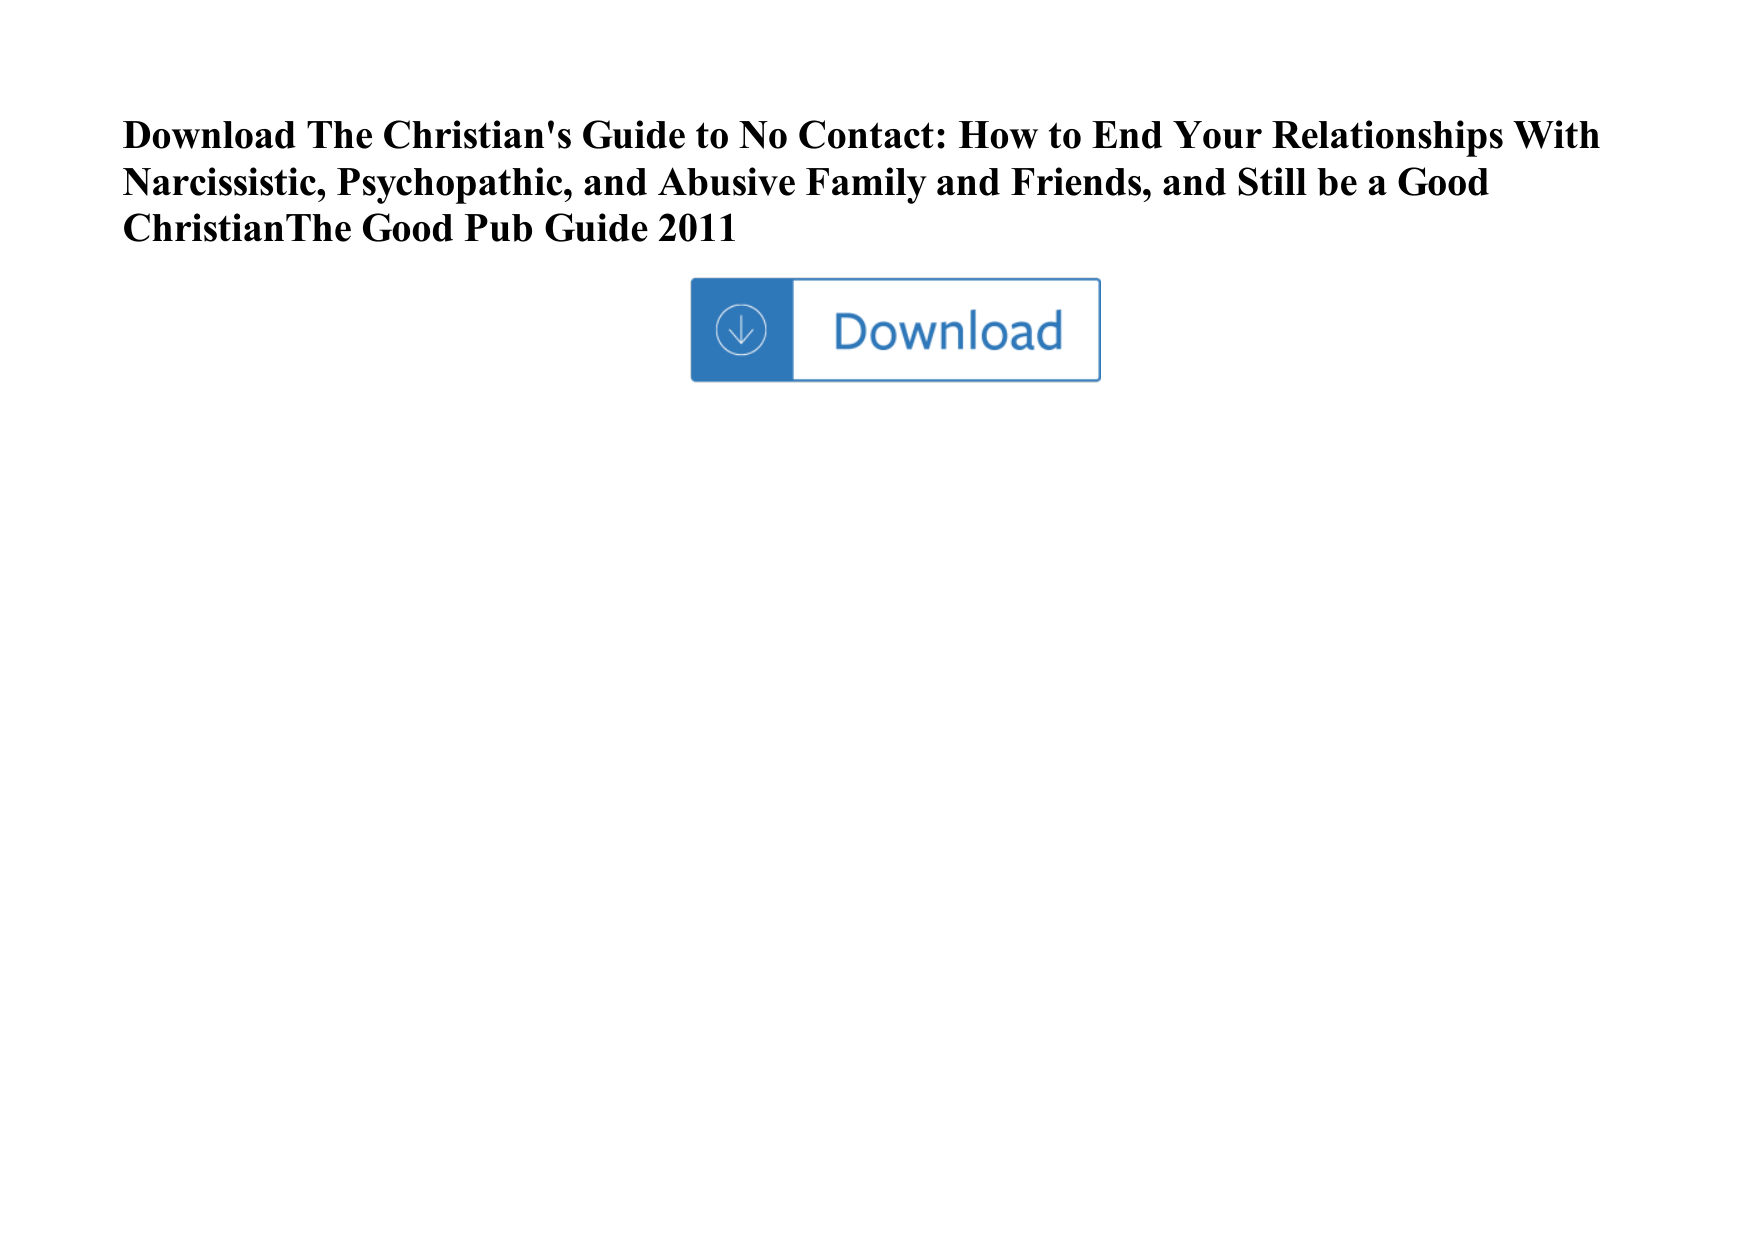 Page 1 of 2 - The Christian's Guide To No Contact: How End Your Relationships With Narcissistic, Psychopathic, And Abusive Family Frien The-christian-s-guide-to-no-contact-how-to-end-your-relationships-with-narcissistic-psychopathic-and-abusive-family-and-friends